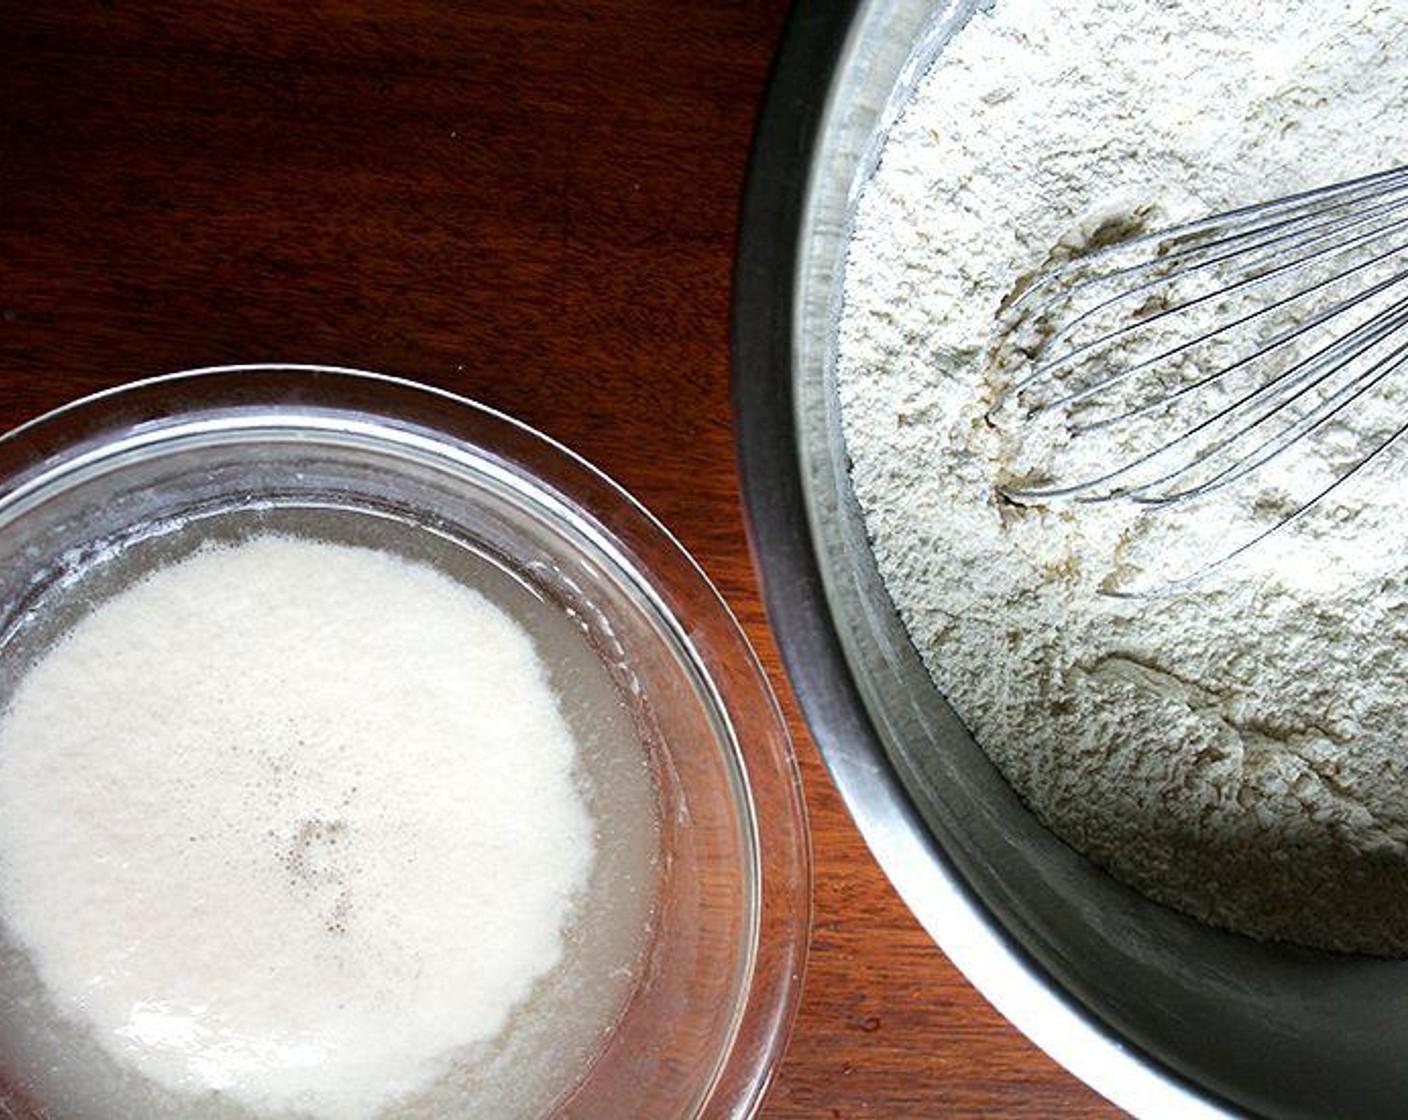 step 1 In a large mixing bowl, whisk together the Unbleached All Purpose Flour (4 cups), Kosher Salt (1/2 Tbsp), Granulated Sugar (1/2 Tbsp), and Instant Dry Yeast (1/2 Tbsp).